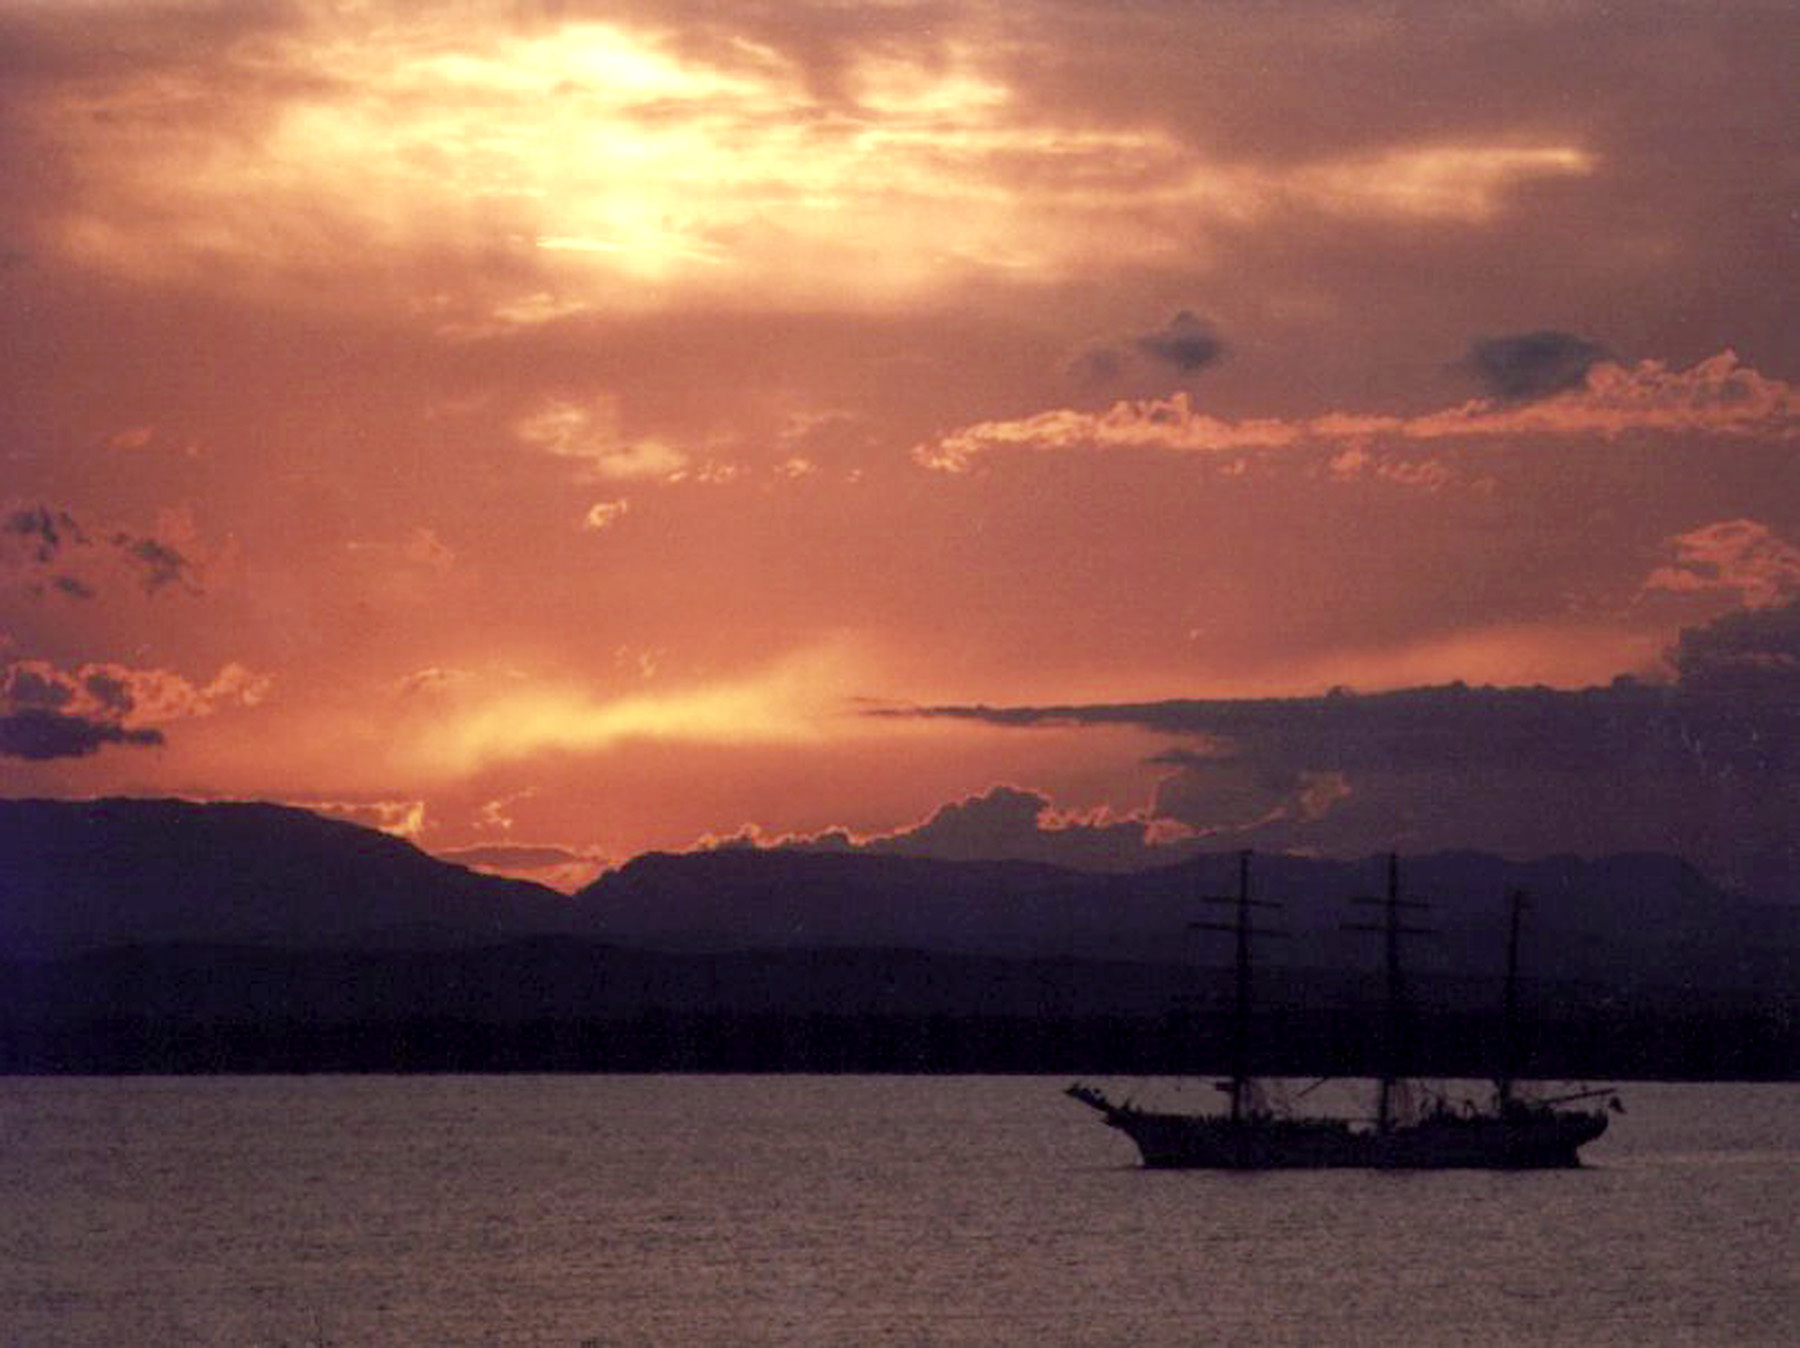 Guantanamo Bay, Cuba (May 20)--The Coast Guard Cutter Eagle sails into Guantanamo Bay to spend the night. The Eagle is involved in training exercises in the Carribean. USN photo by FINCH, MICHAEL L LCDR